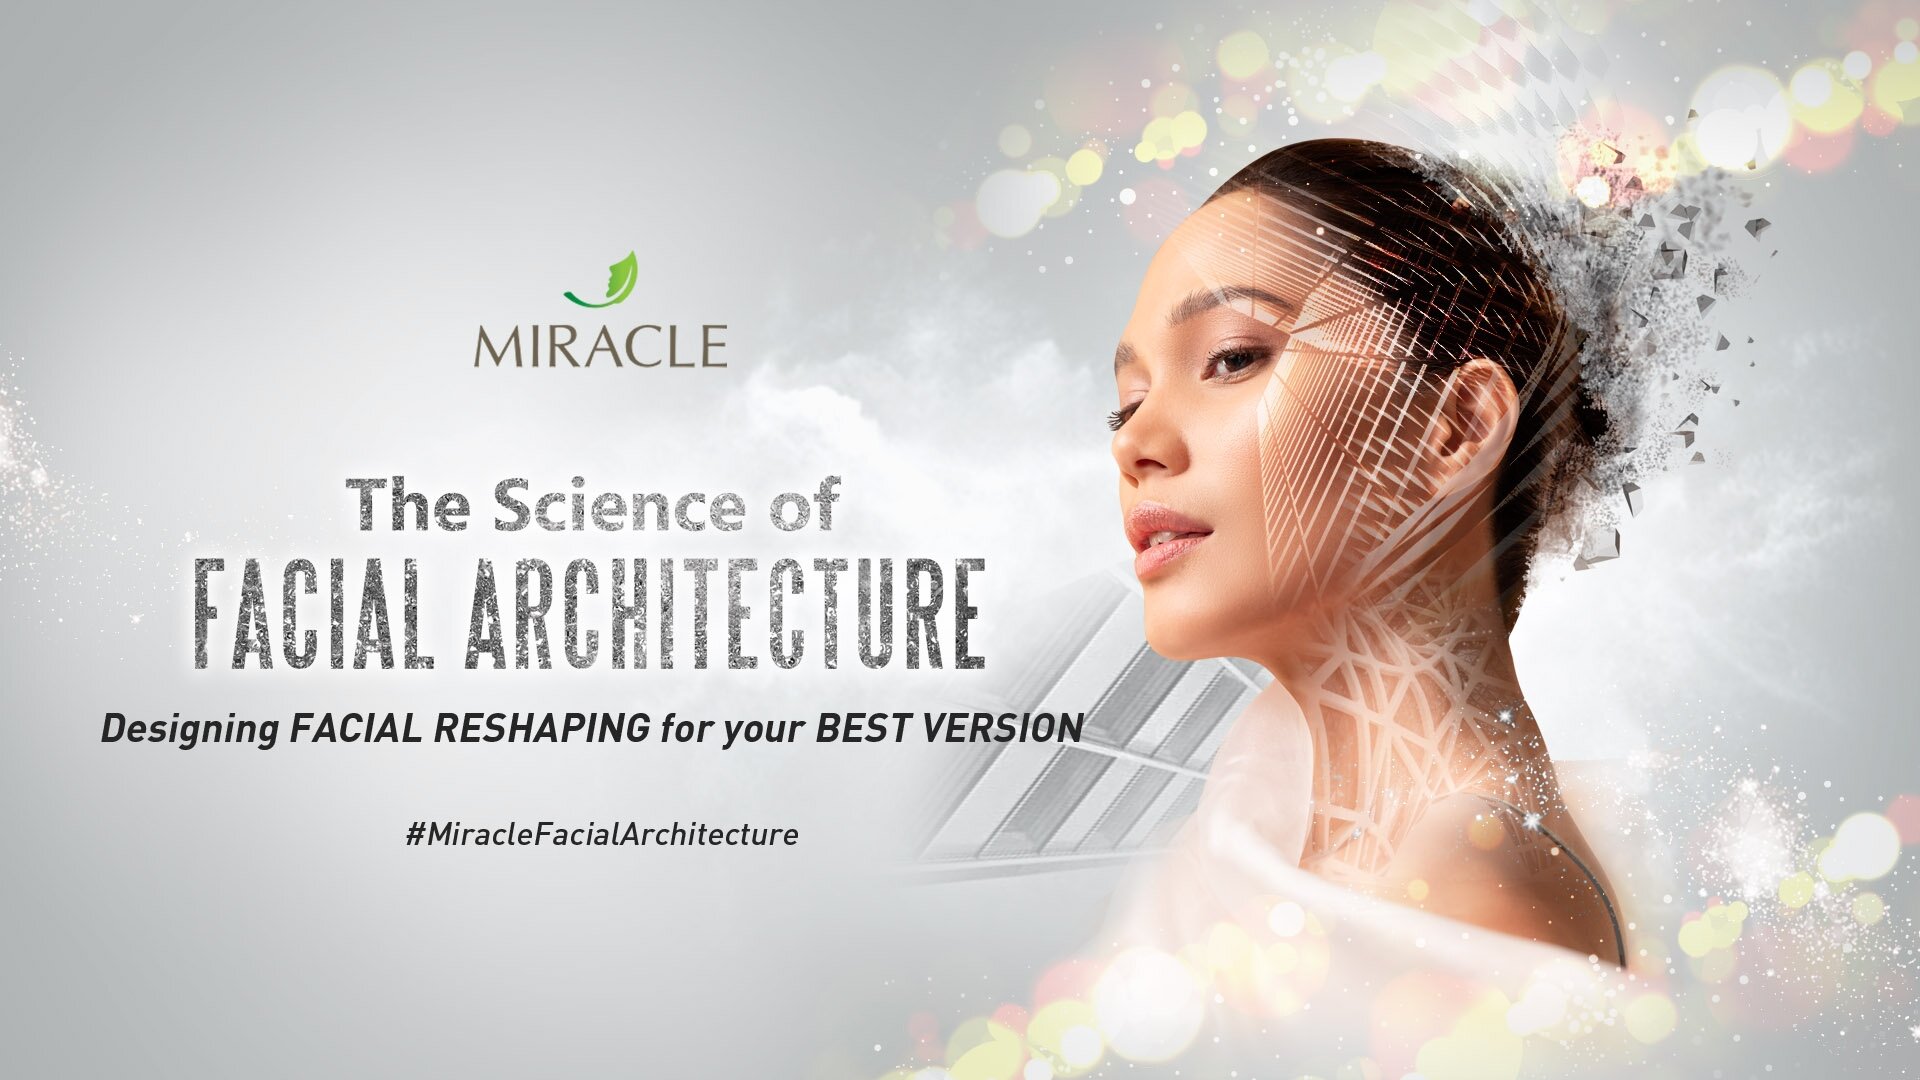 Miracle: The Science of Facial Architecture